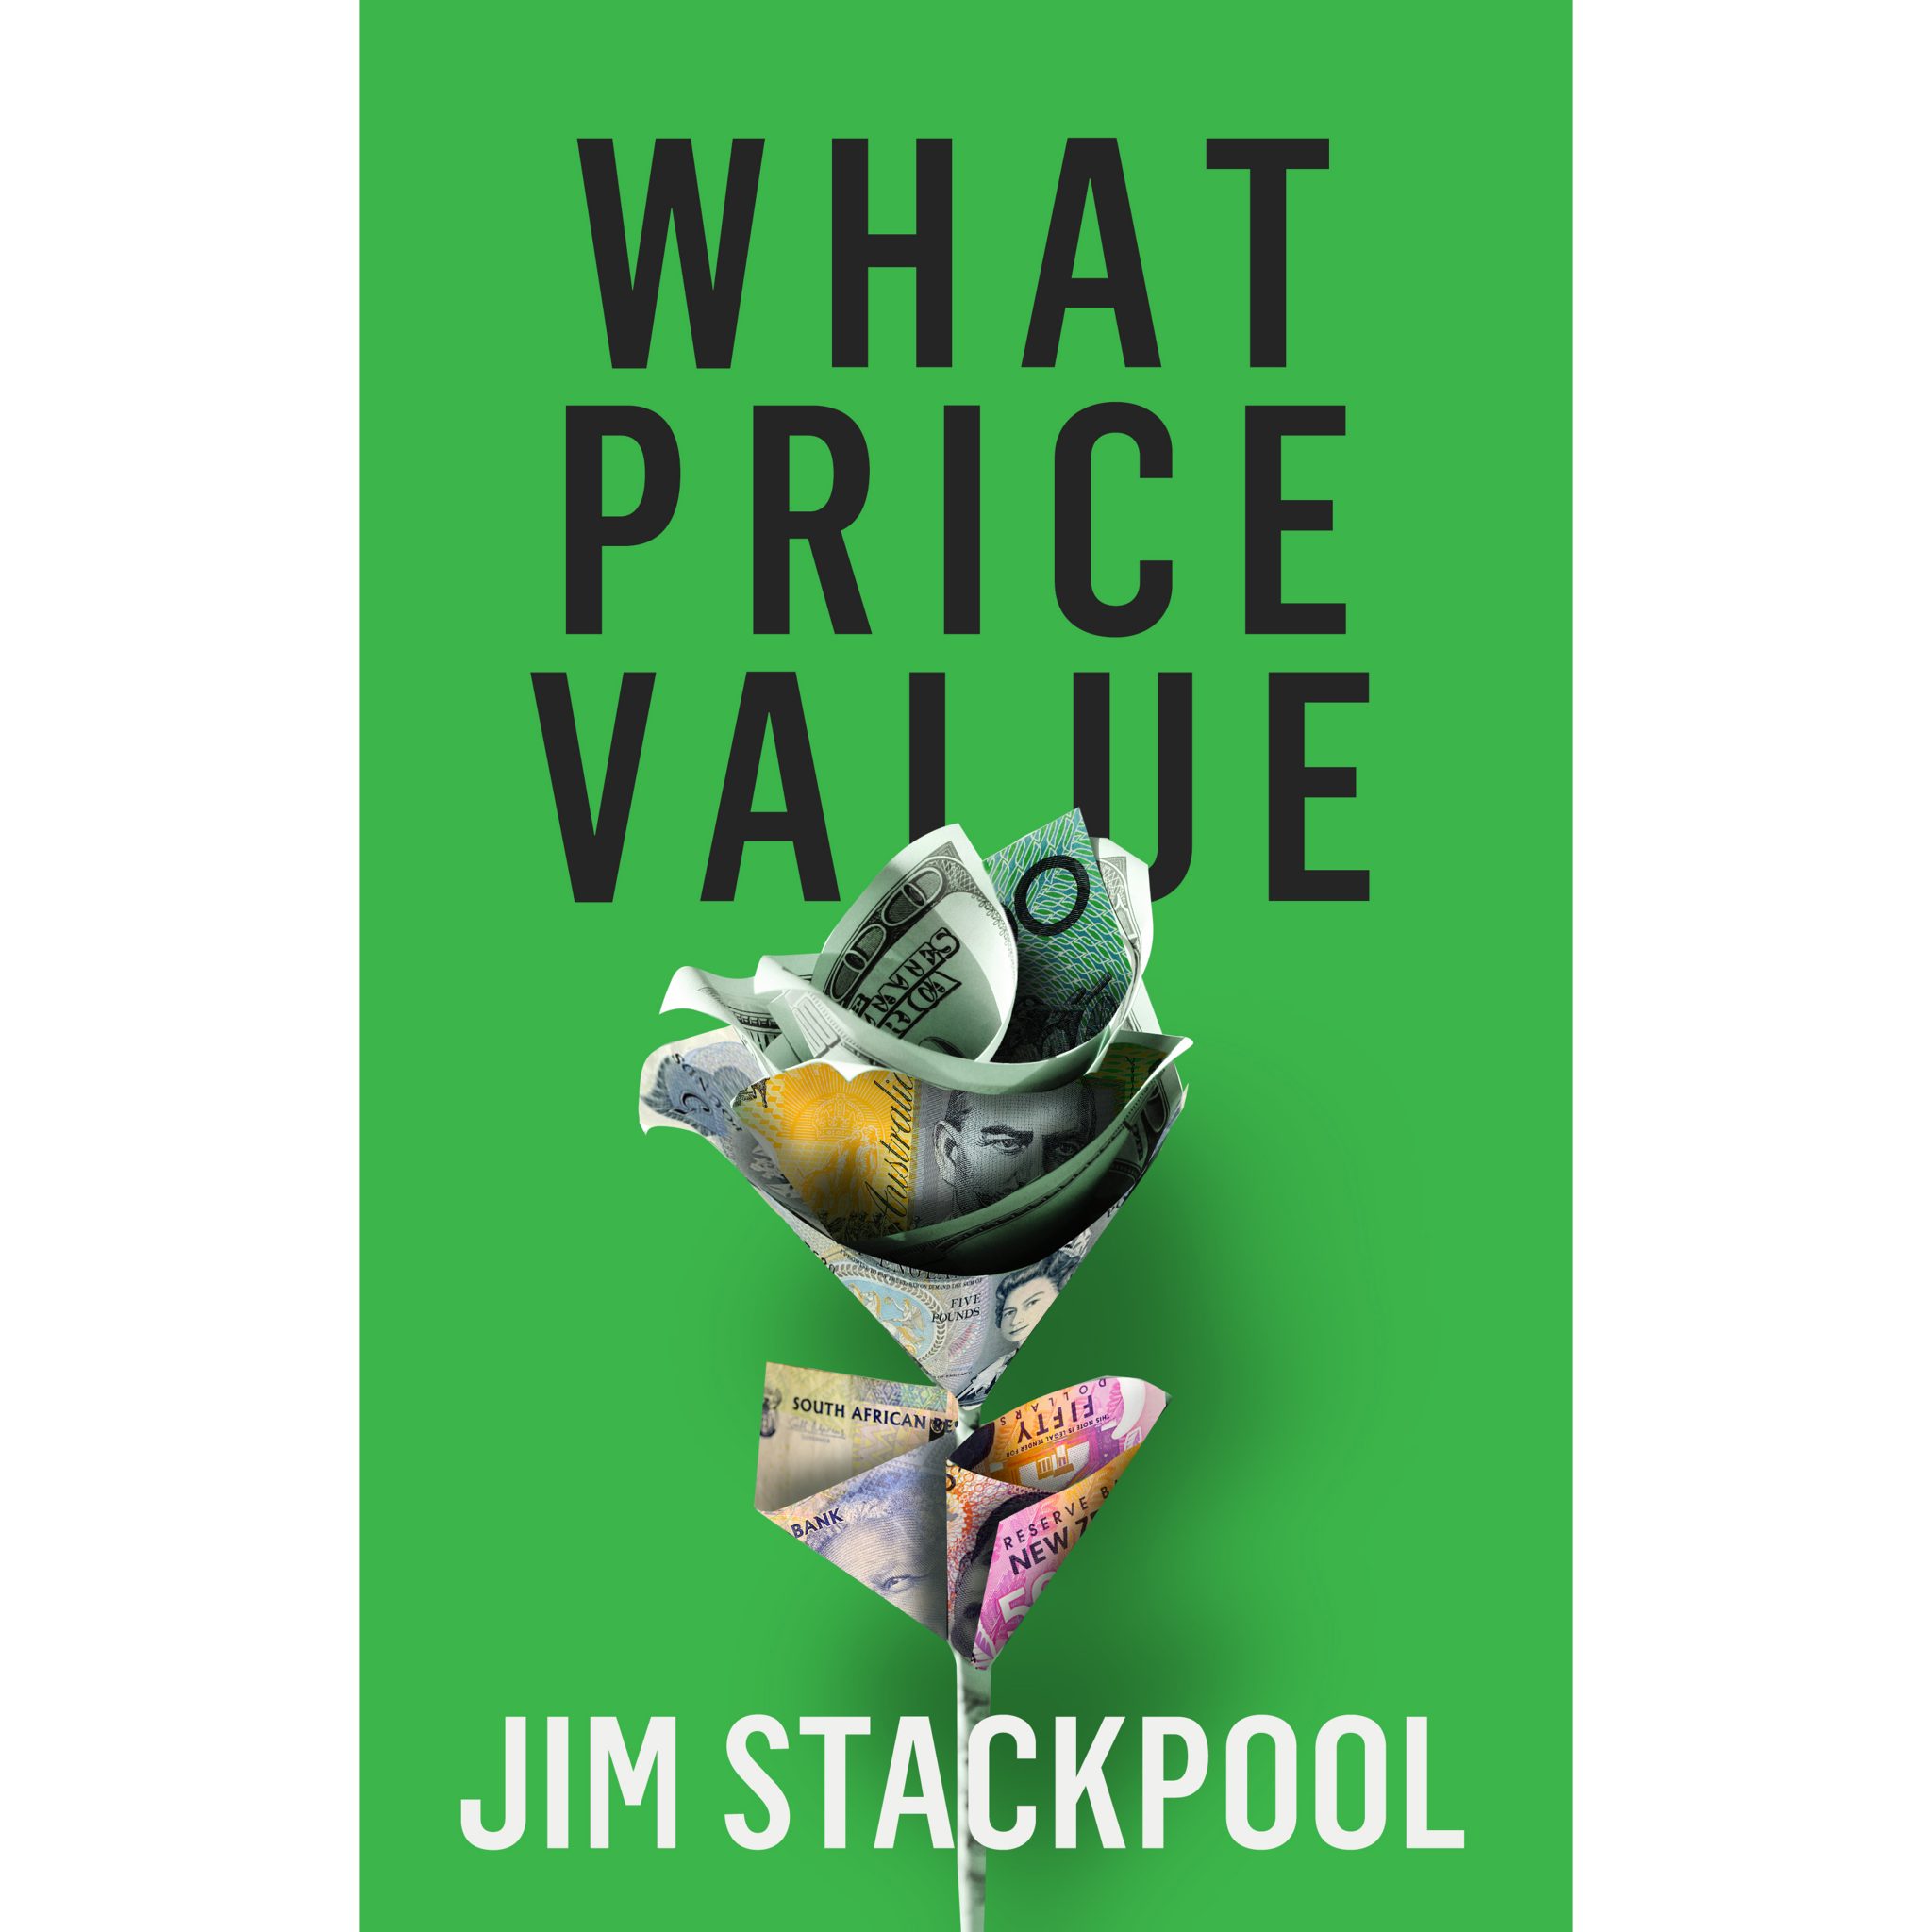 What Price Value by Jim Stackpool